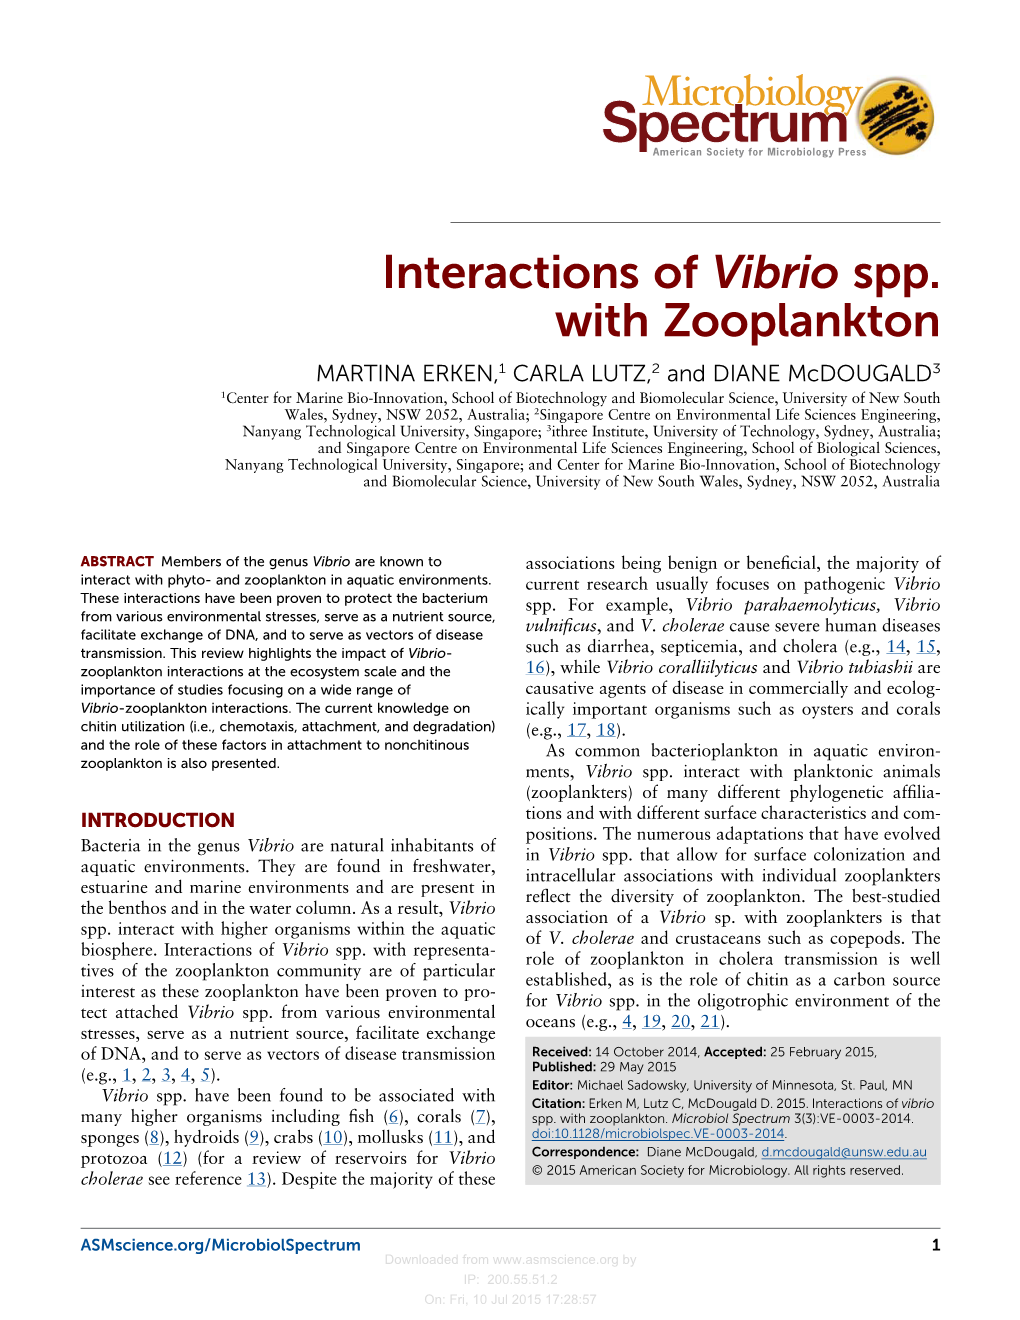 Interactions of Vibrio Spp. with Zooplankton